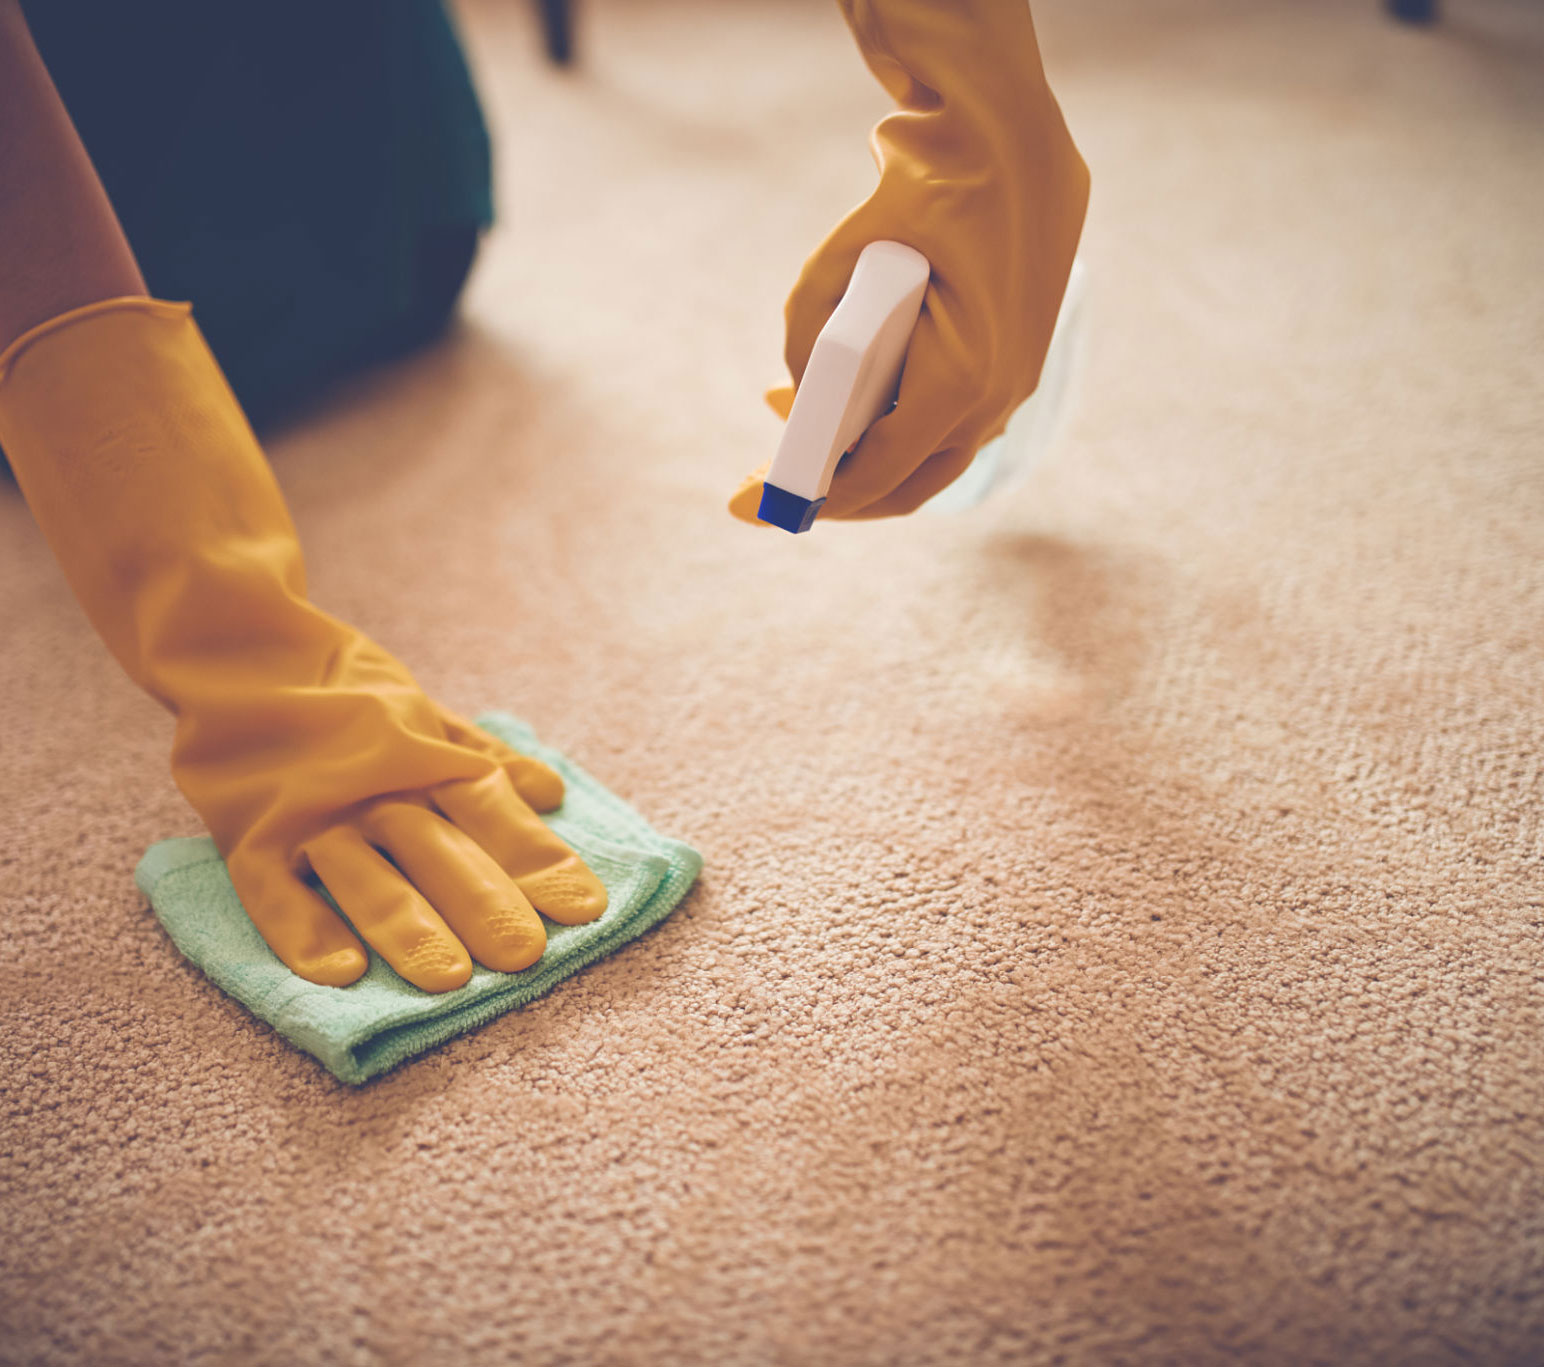 How to Clean Dried Cat Urine from Carpet